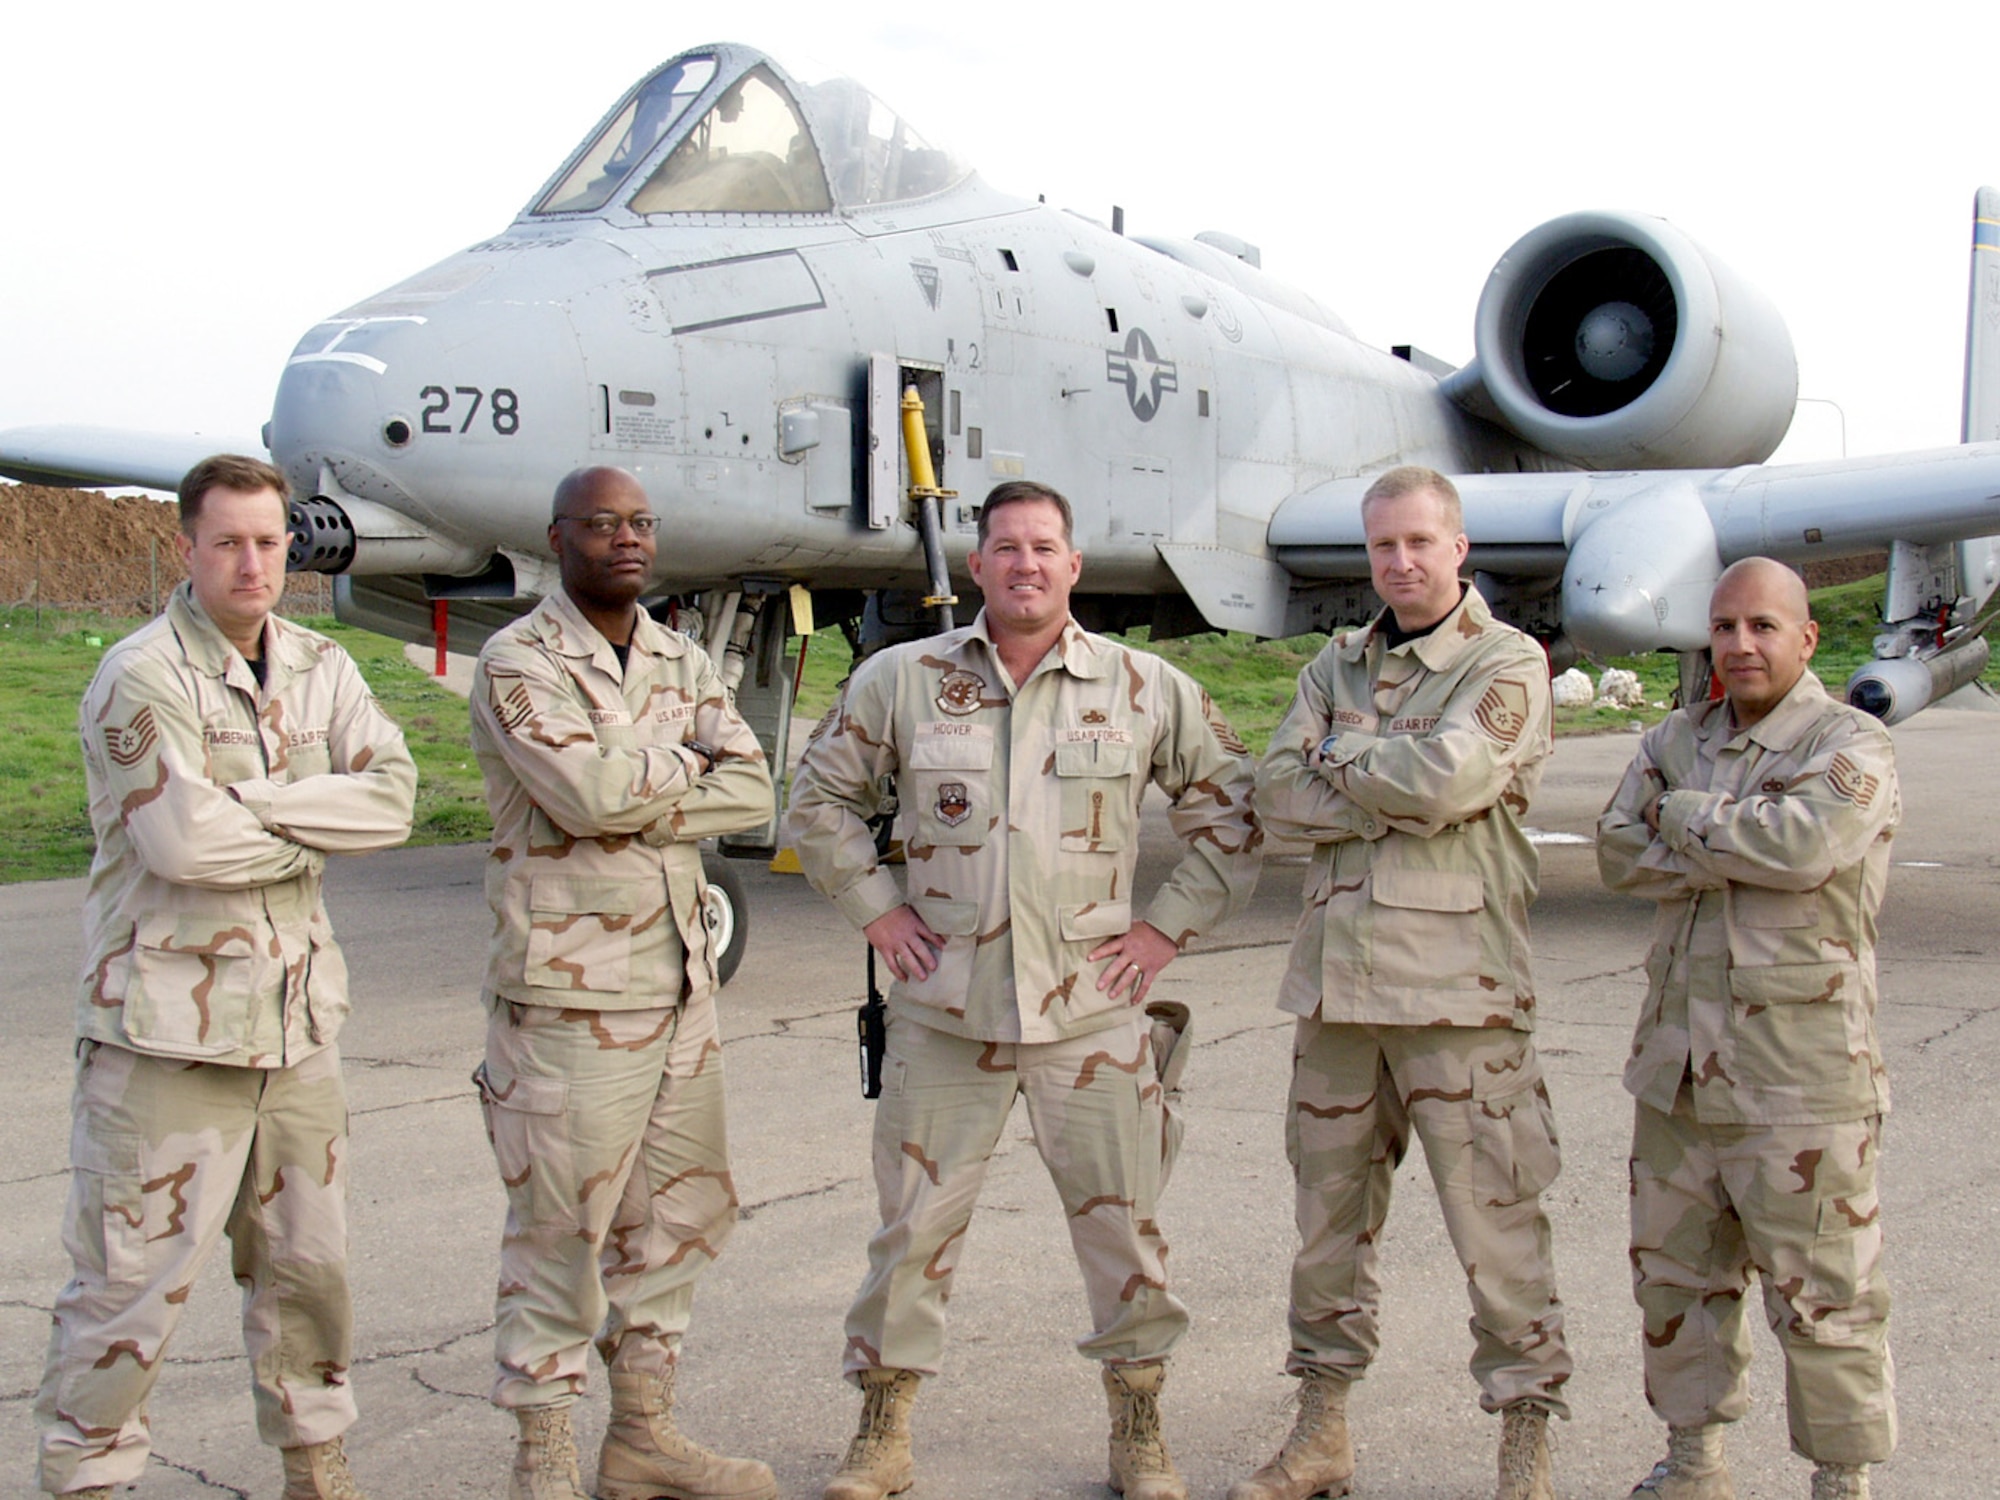 KIRKUK AIR BASE, Iraq -- From left, Tech. Sgt. Edward Timberman, Master Sgt. Elbert Bembry, Senior Master Sgt. Benjamin Hoover, Master Sgt. Darrell Wiedenbeck and Tech. Sgt. Steven Sepeda stand near an A-10 Thunderbolt II here.  The five A-10 maintainers served in both operations Desert Storm and Iraqi Freedom during their careers.  (U.S. Air Force photo by Tech. Sgt. Jeffrey Williams)